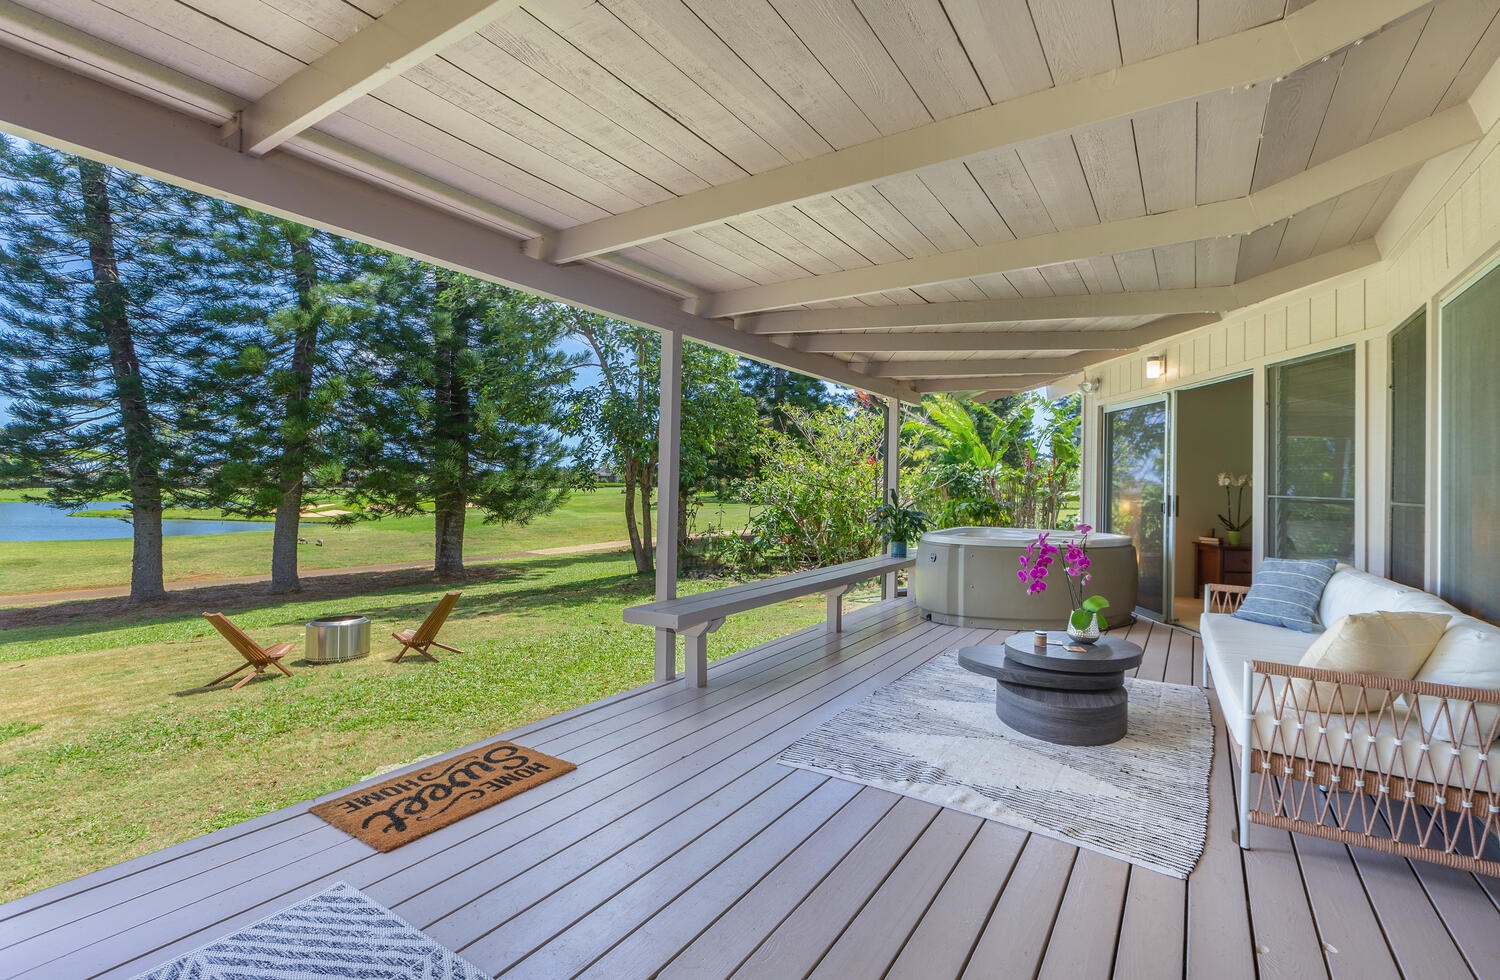 Princeville Vacation Rentals, Wai Puna - This covered deck offers the perfect space to cool down and enjoy the outdoors